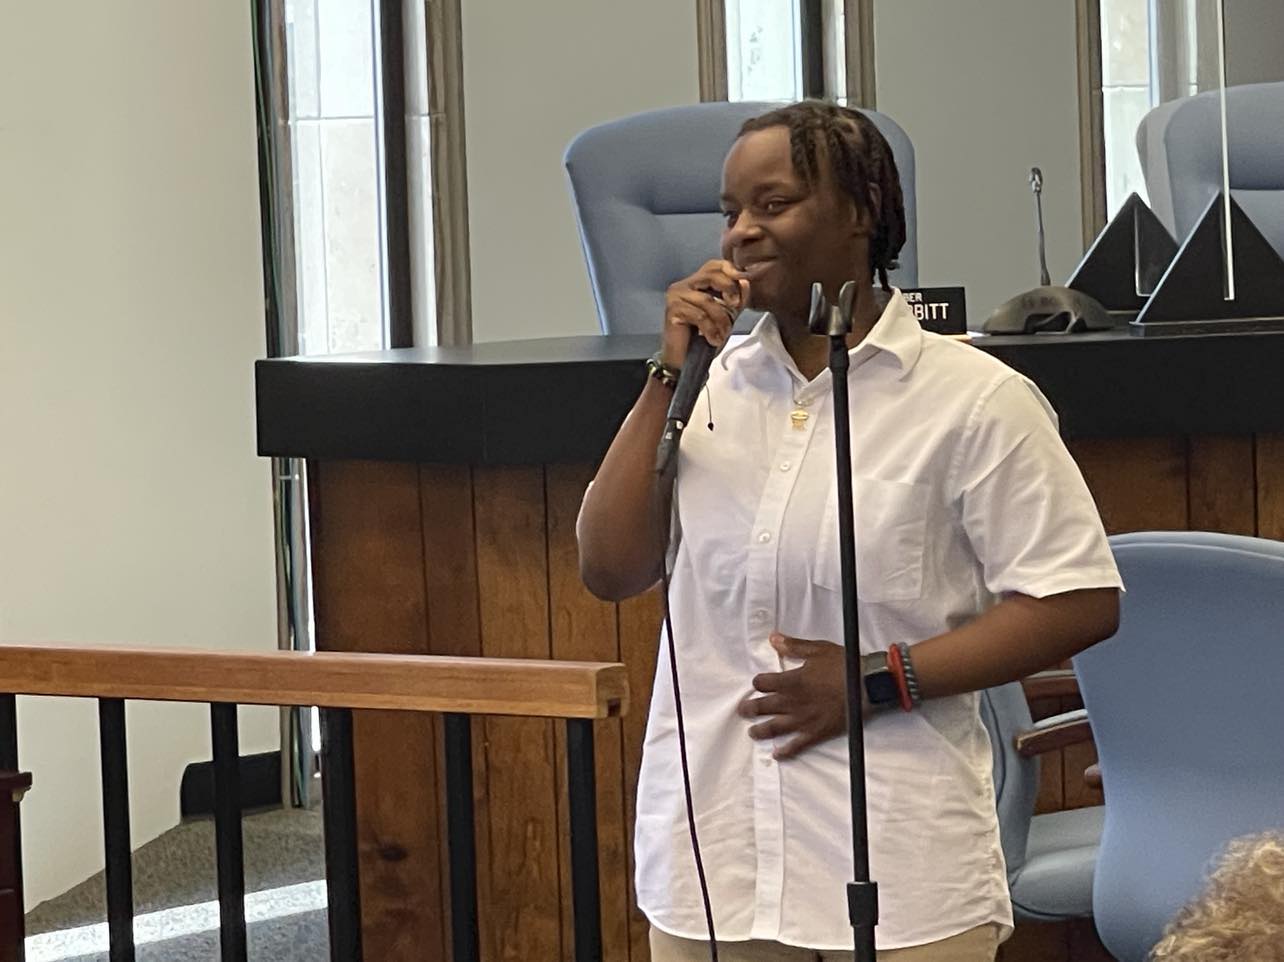 Makiyah Coppin, an incoming junior at Atlantic County Institute of Technology, discusses sexism and gender roles after returning from South Africa through the A Leadership Journey program. Photo Credit: Mark Tyler